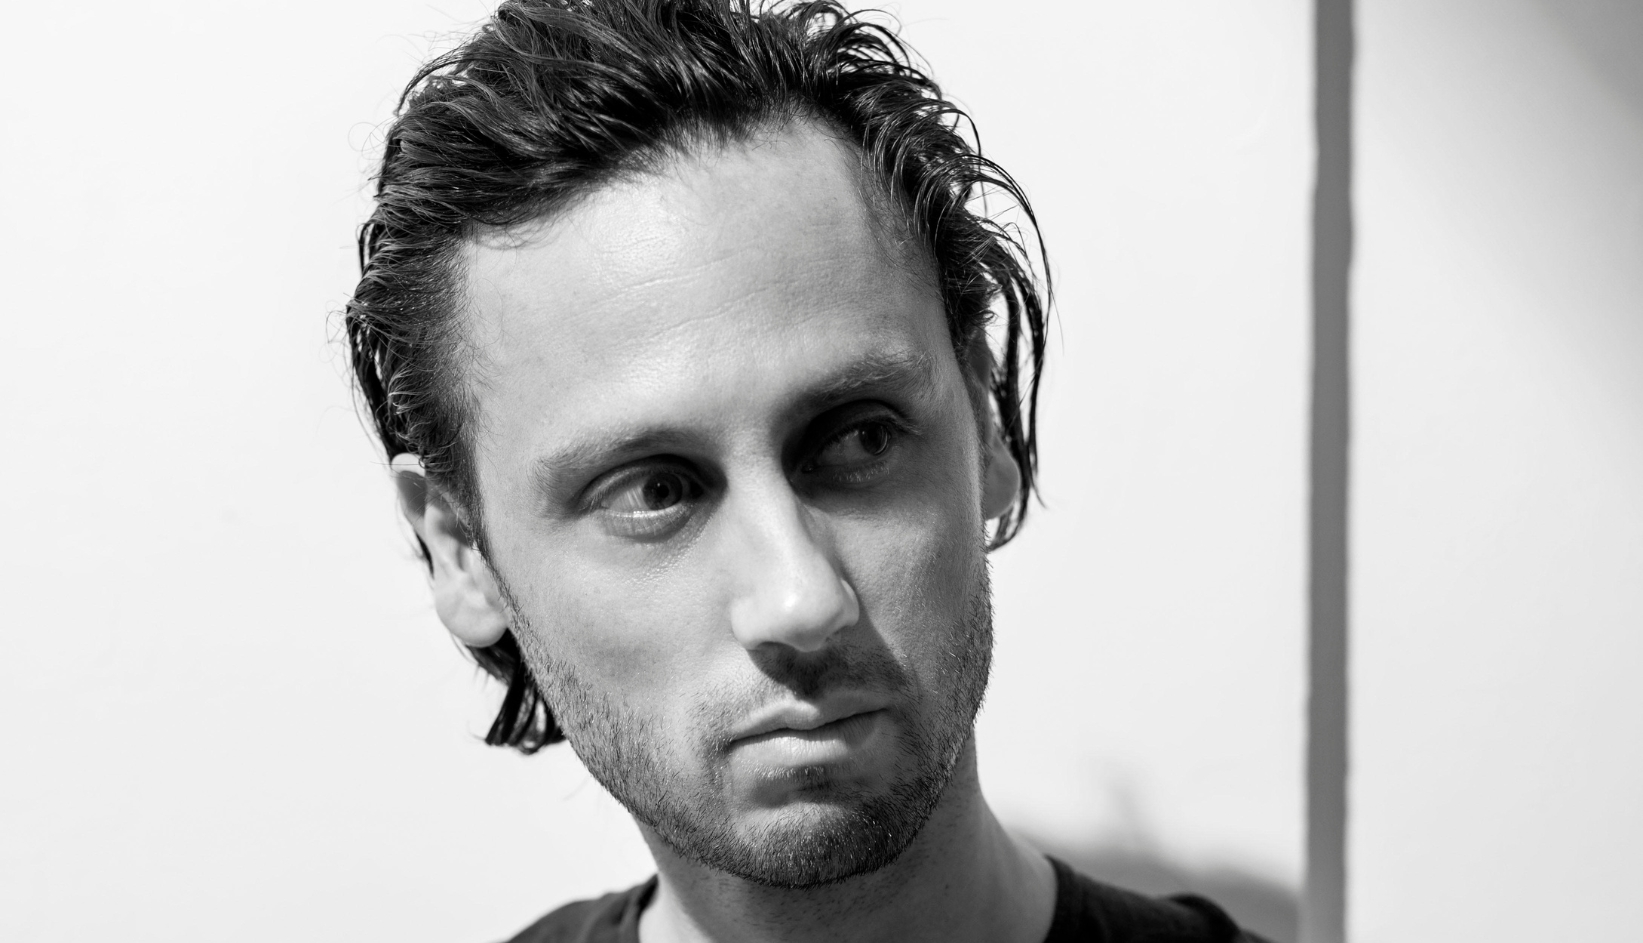 Dutch DJ/Producer Mason to Host Album Launch Party at Ministry of Sound